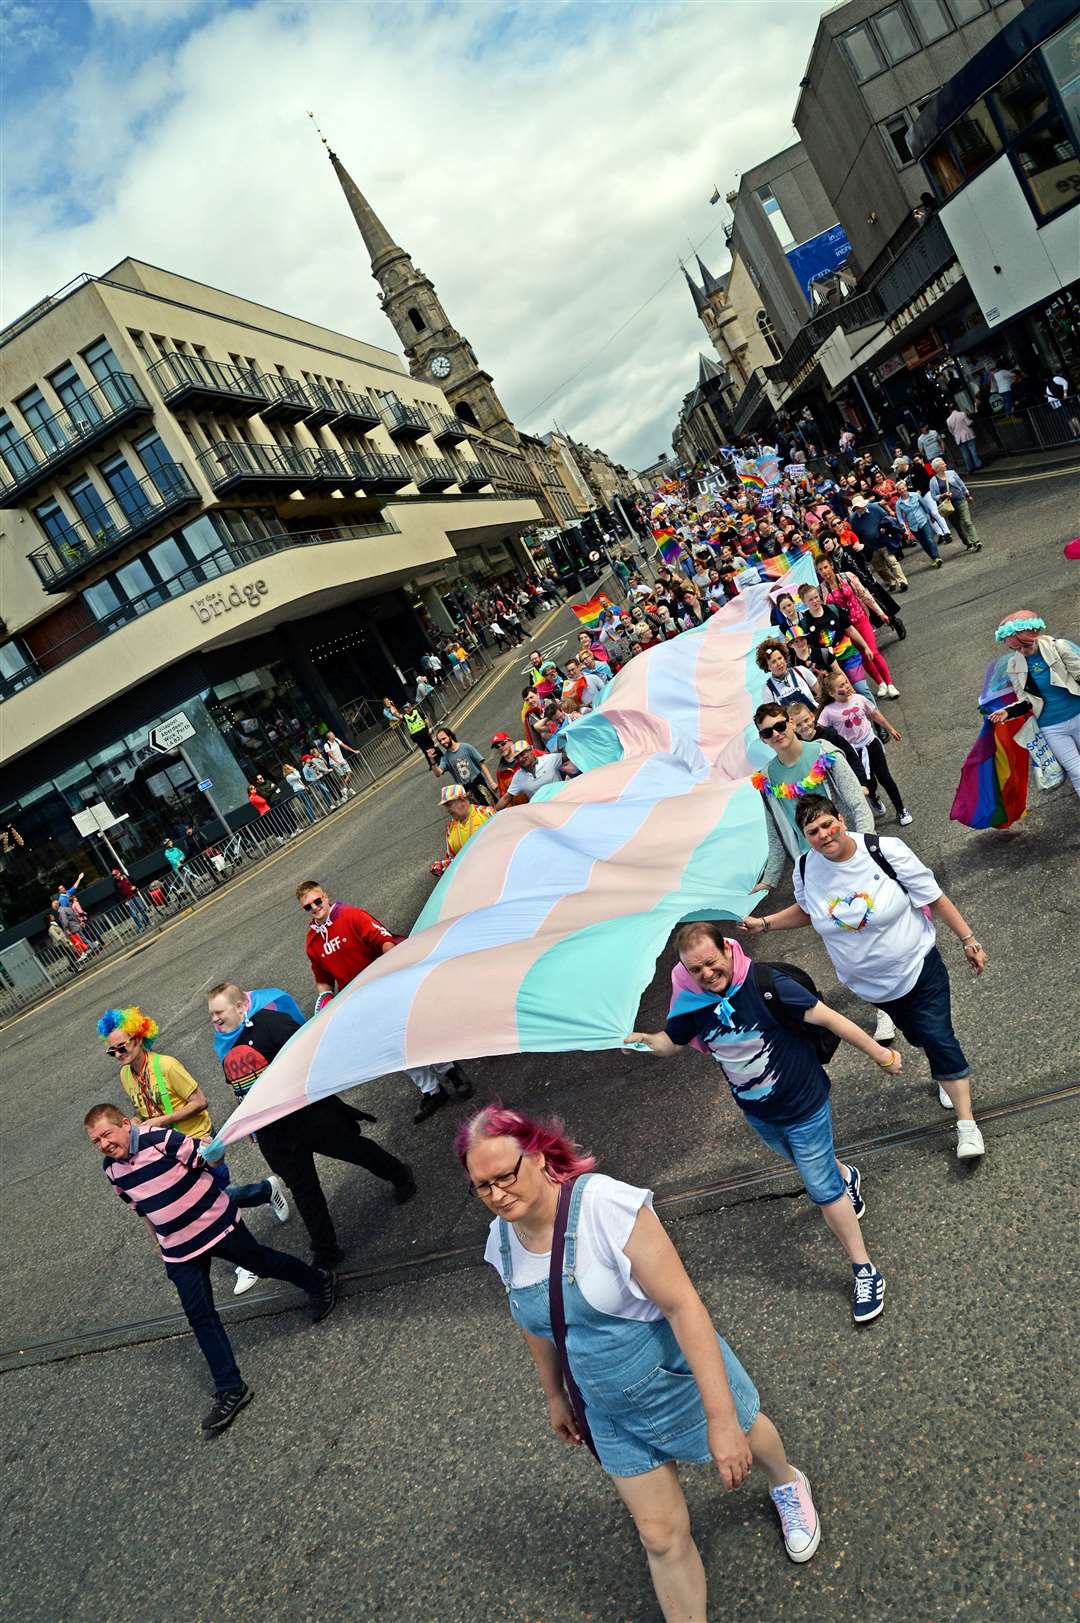 A giant flag in support of the transgender community making its way at the 2019 march. Picture: Gair Fraser